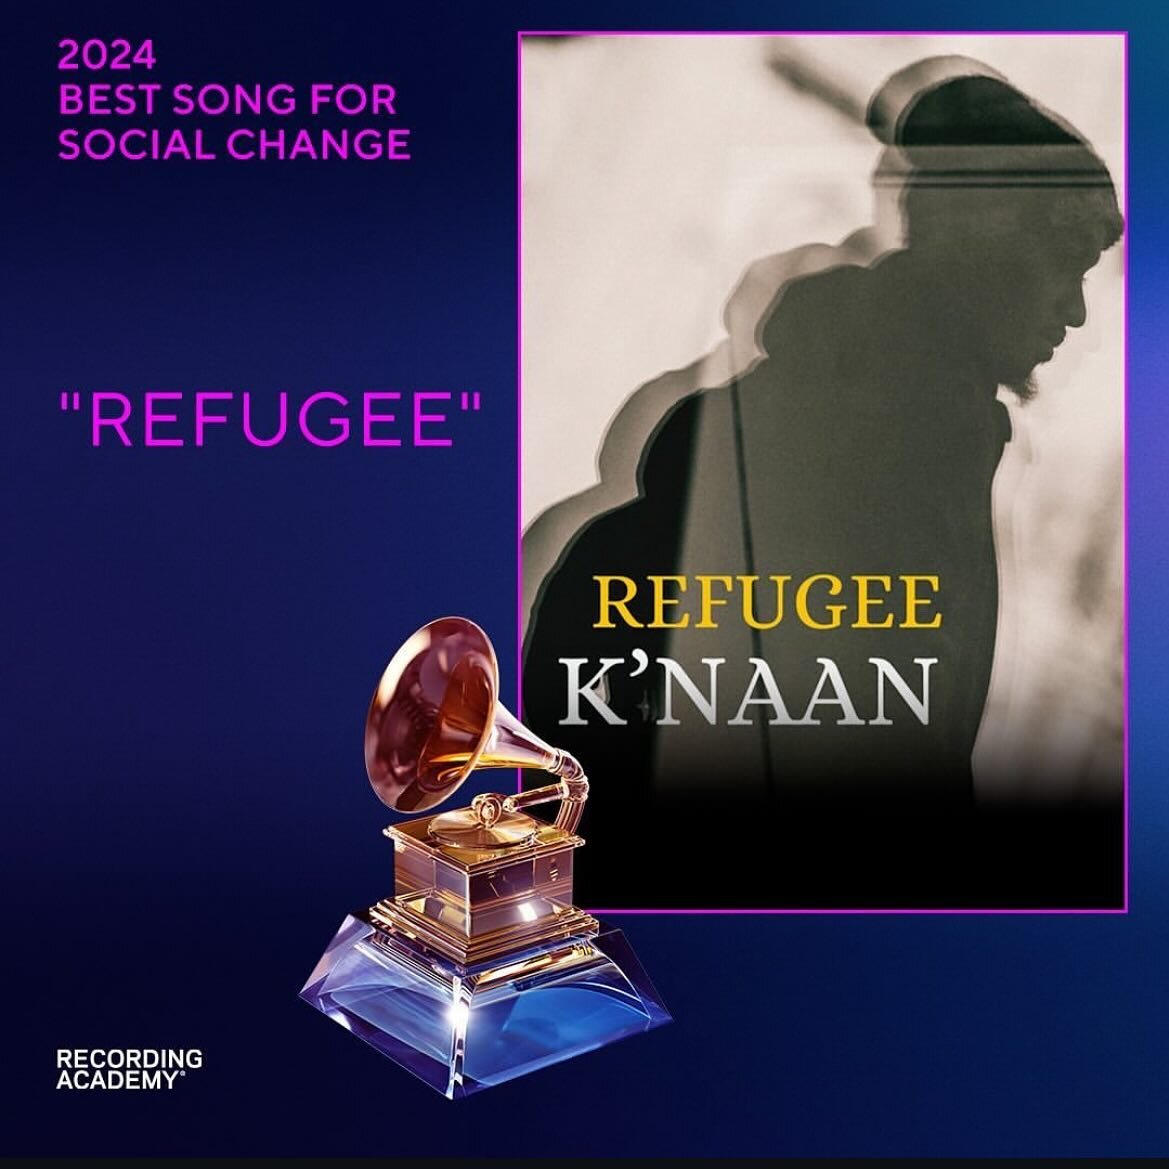 What a way to start the year! We just got word that K&rsquo;Naan&rsquo;s track &ldquo;Refugee&rdquo; has been awarded a special merit Grammy Award 🏆 The track was recorded at The Cutting Room last year by our staff engineer Sloan Welsch. Congratulat